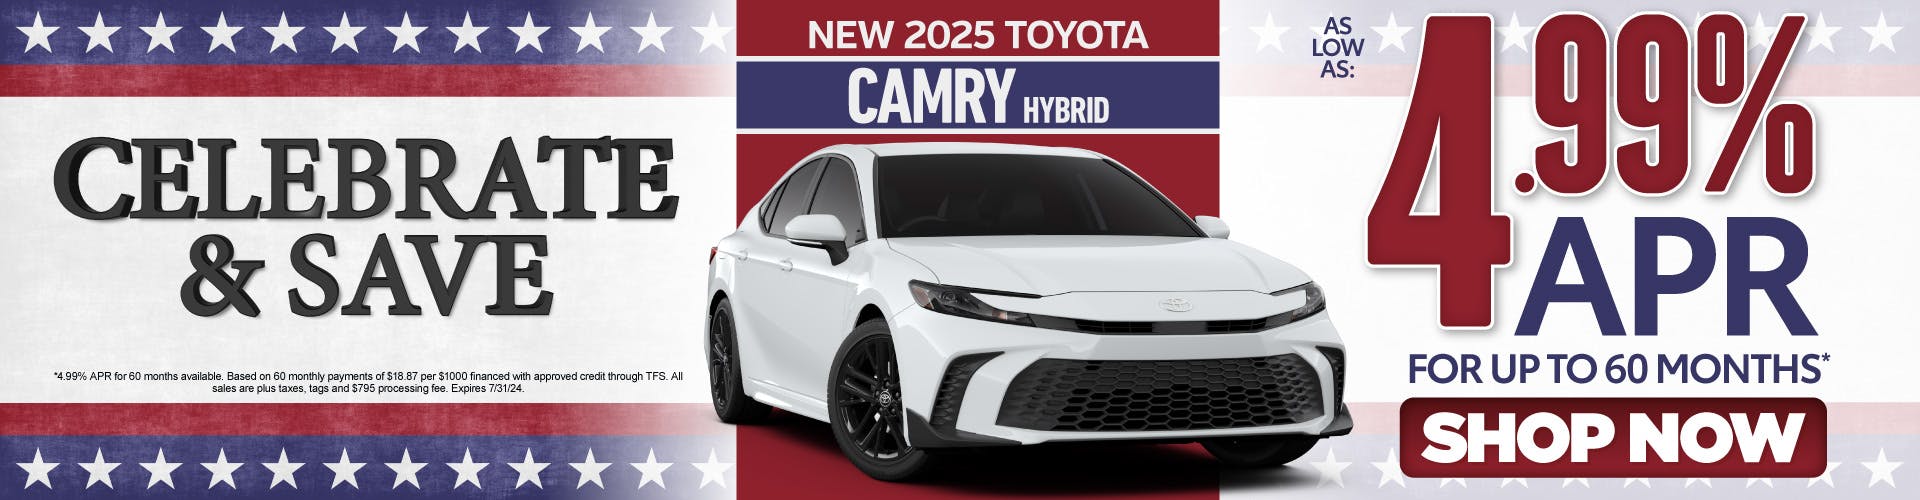 New 2025 Toyota Camry Hybrid – As Low as 4.99% APR for up to 60 months* – Act Now